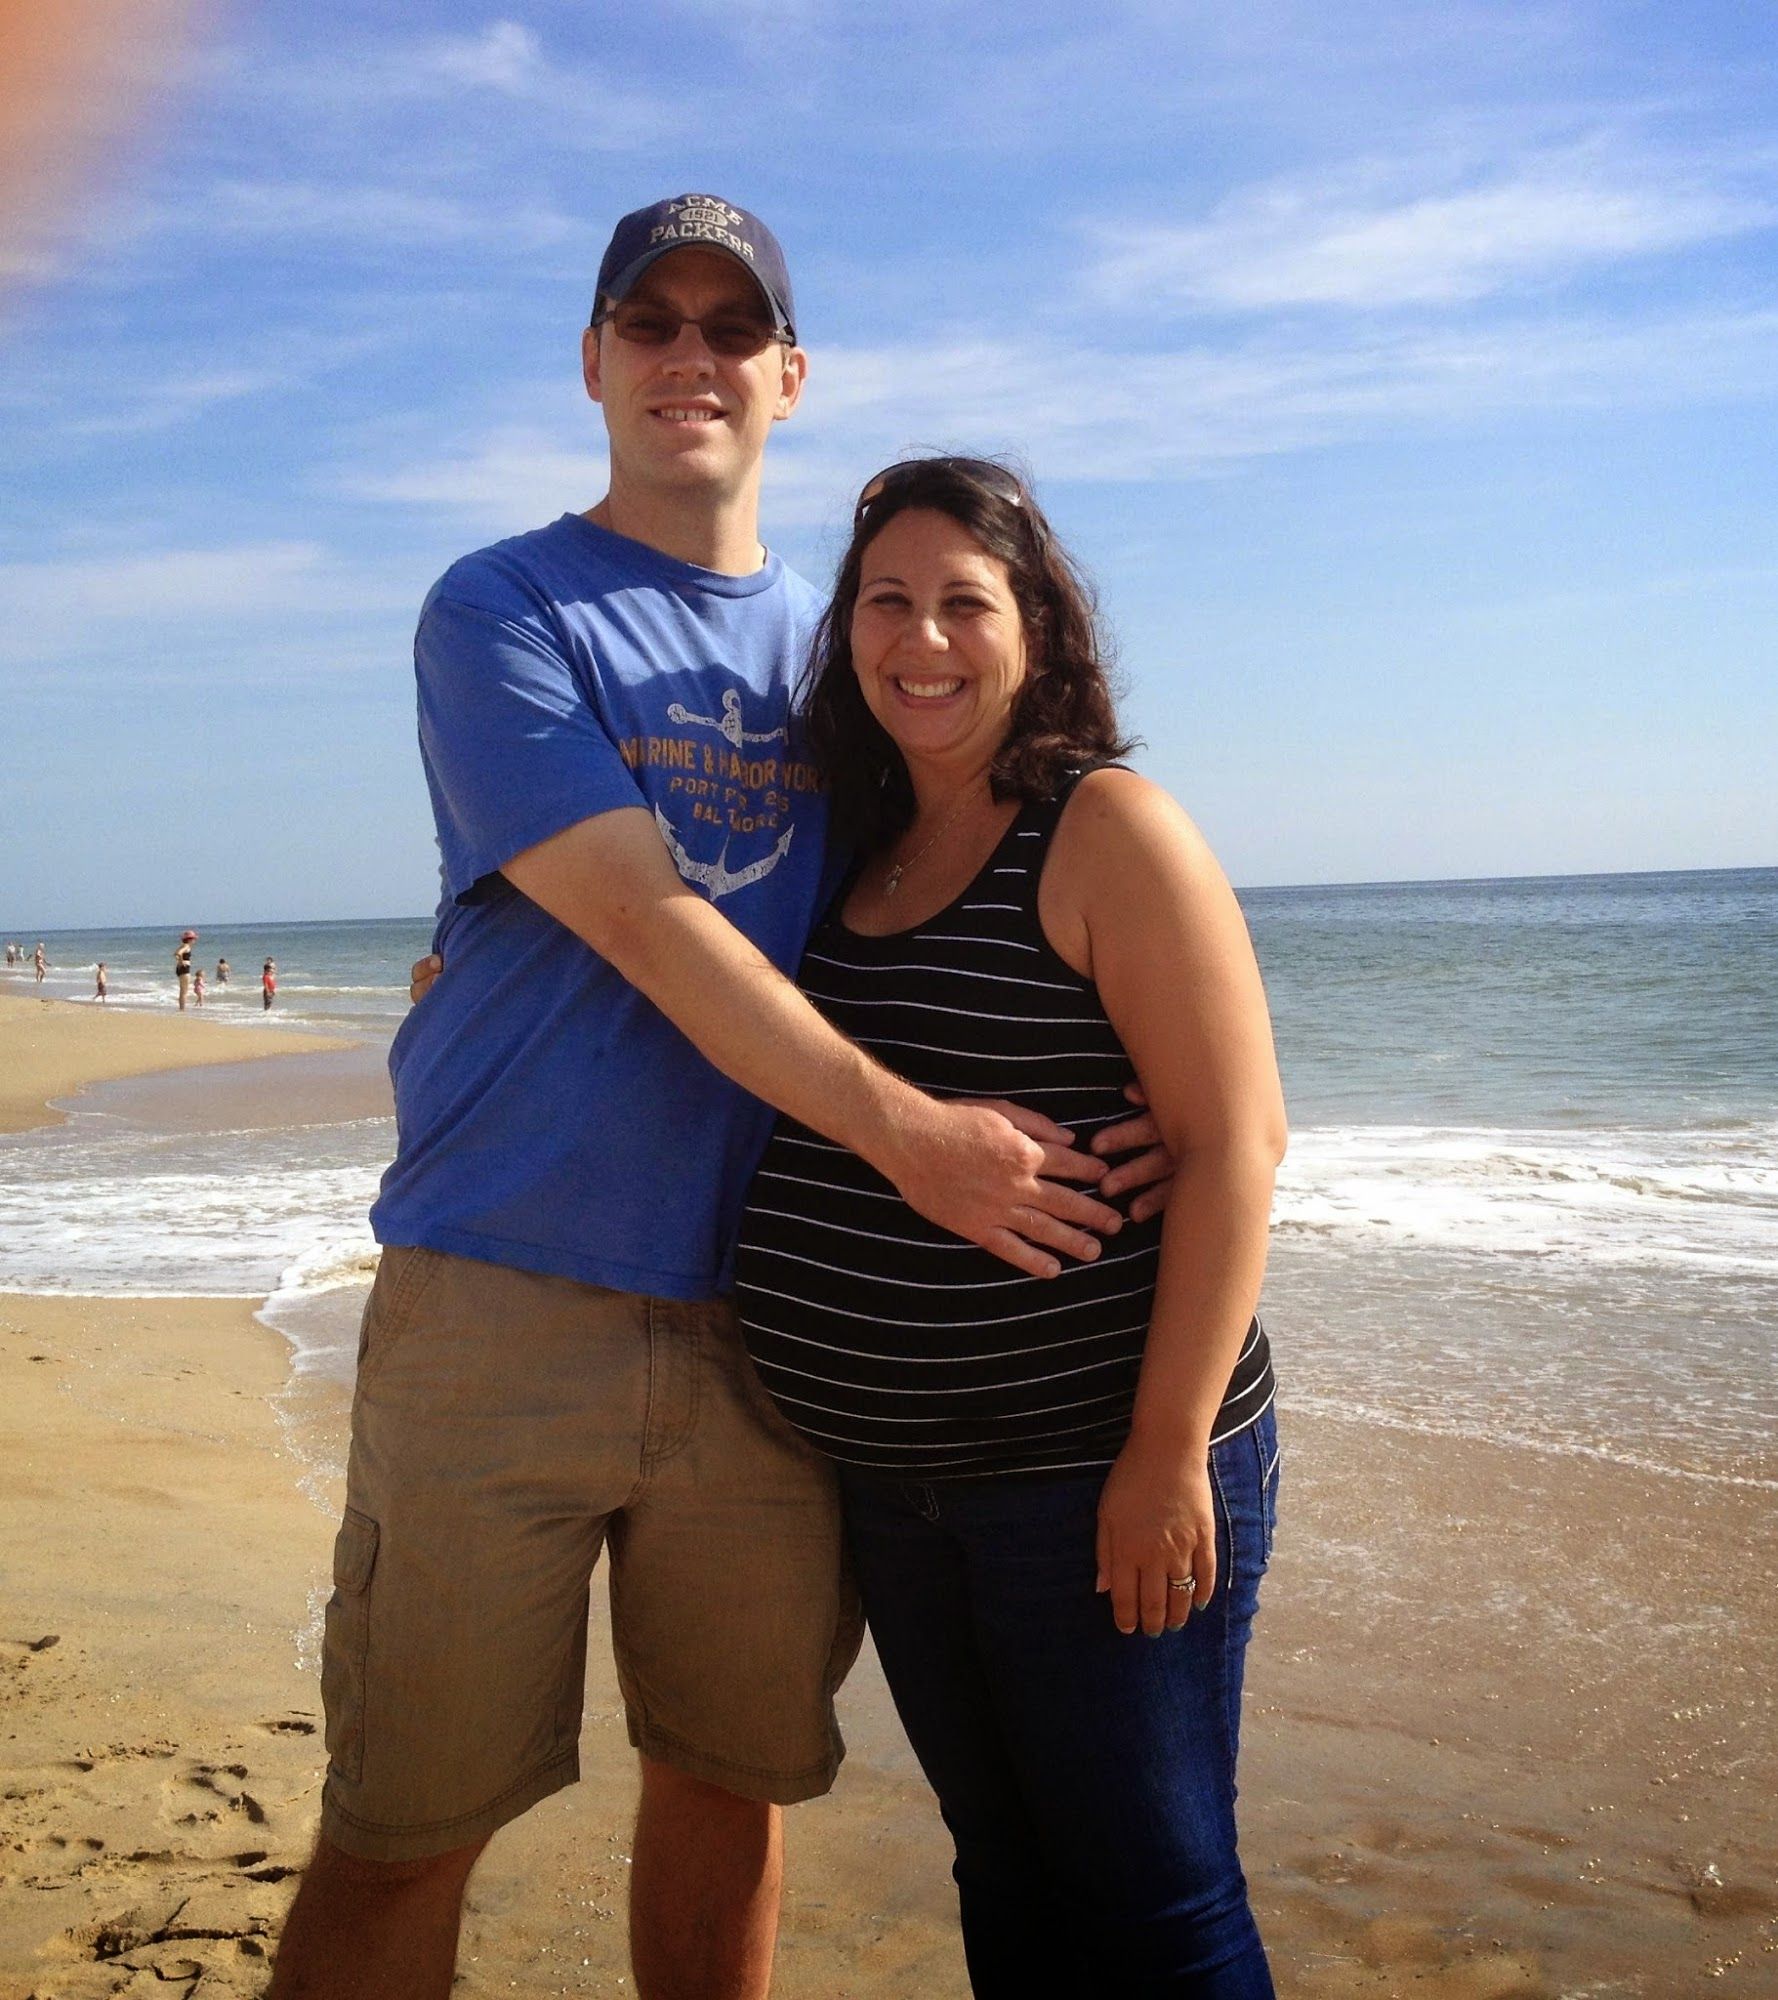  30 weeks pregnant at the beach 